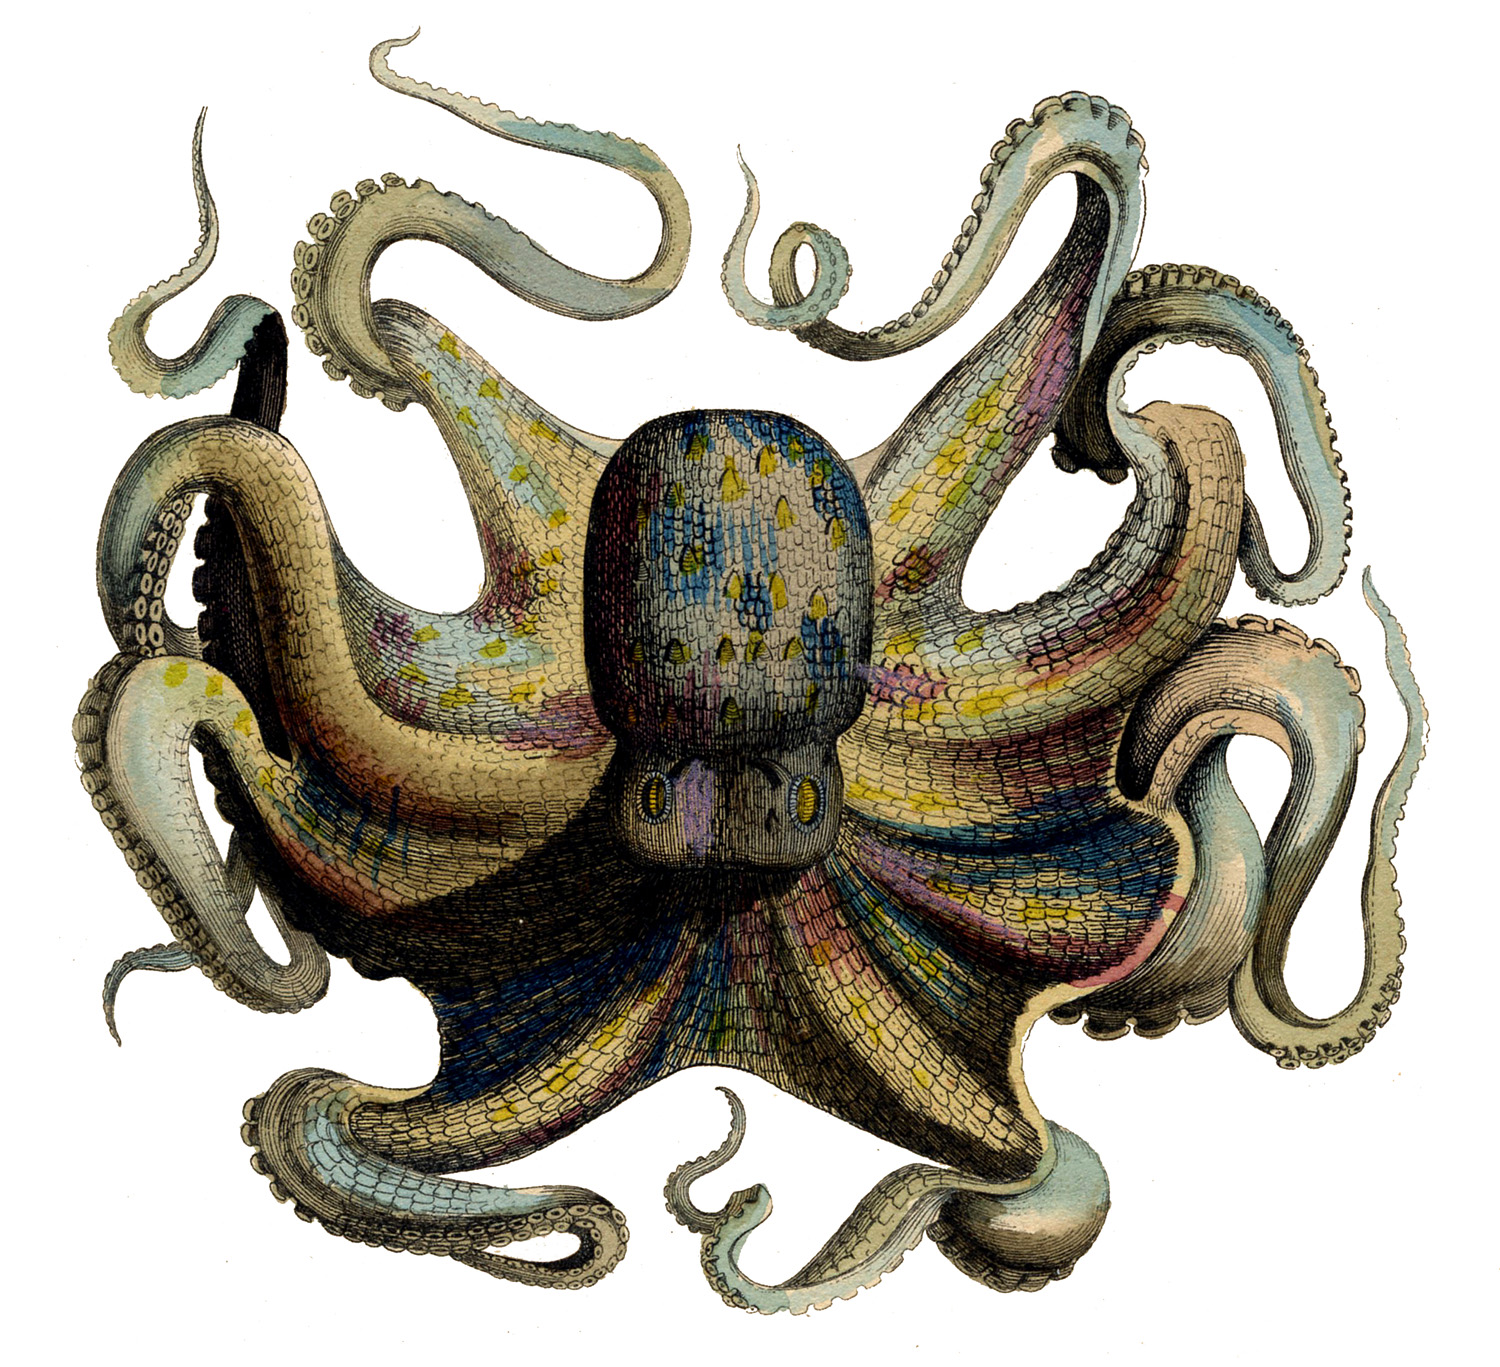 octopus+vintage+image+graphicsfairy7